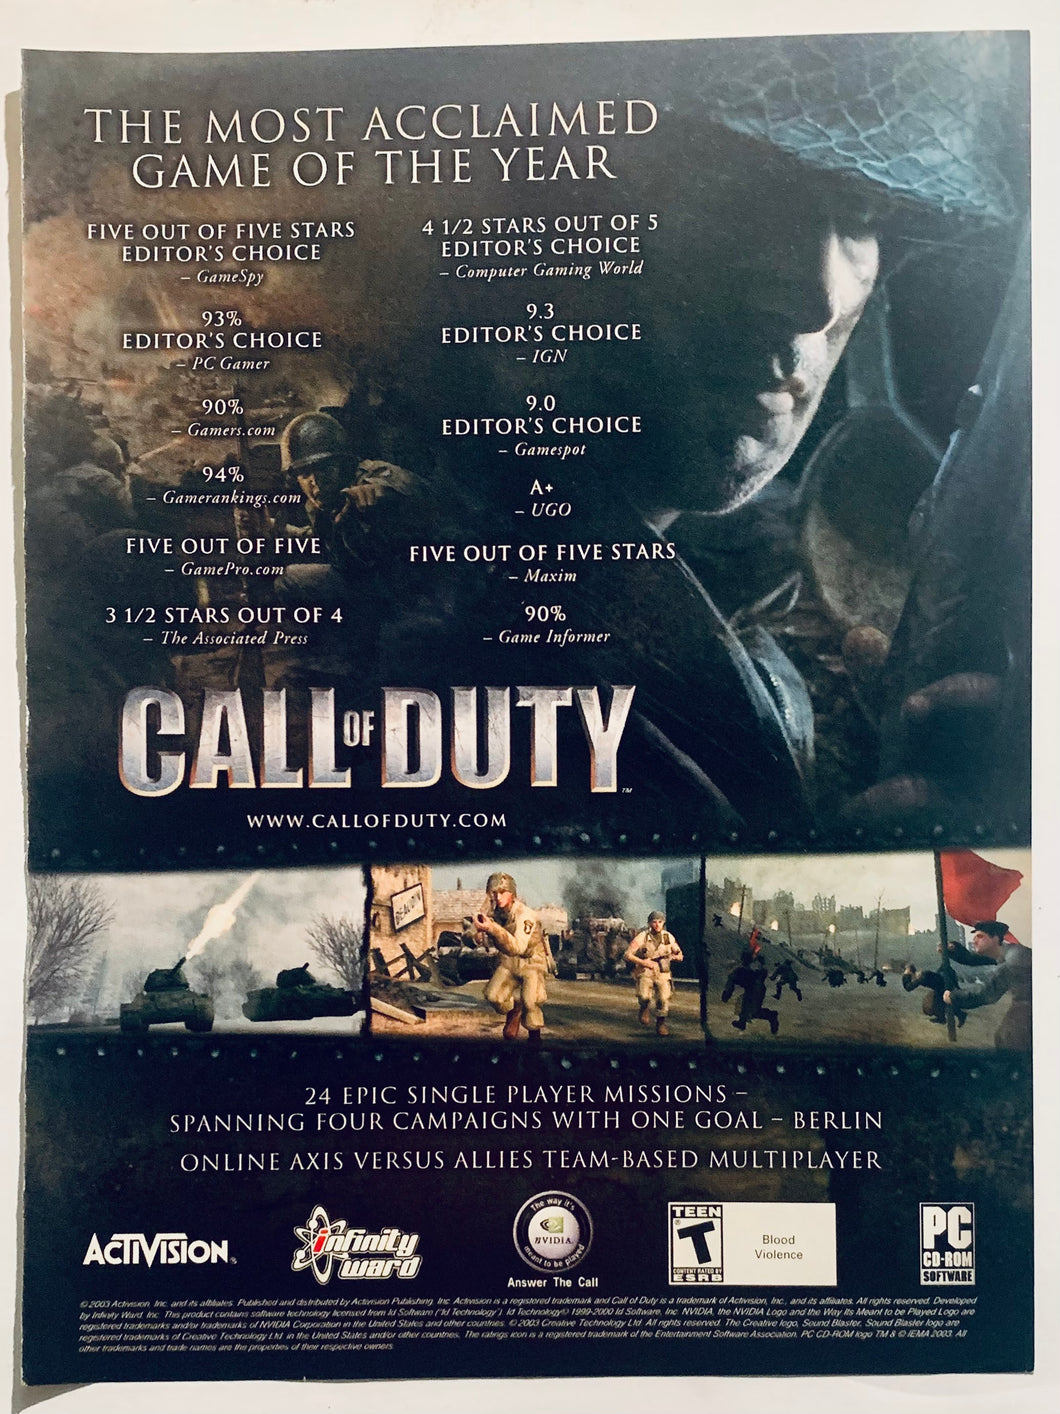 Call of Duty - PC - Original Vintage Advertisement - Print Ads - Laminated A4 Poster